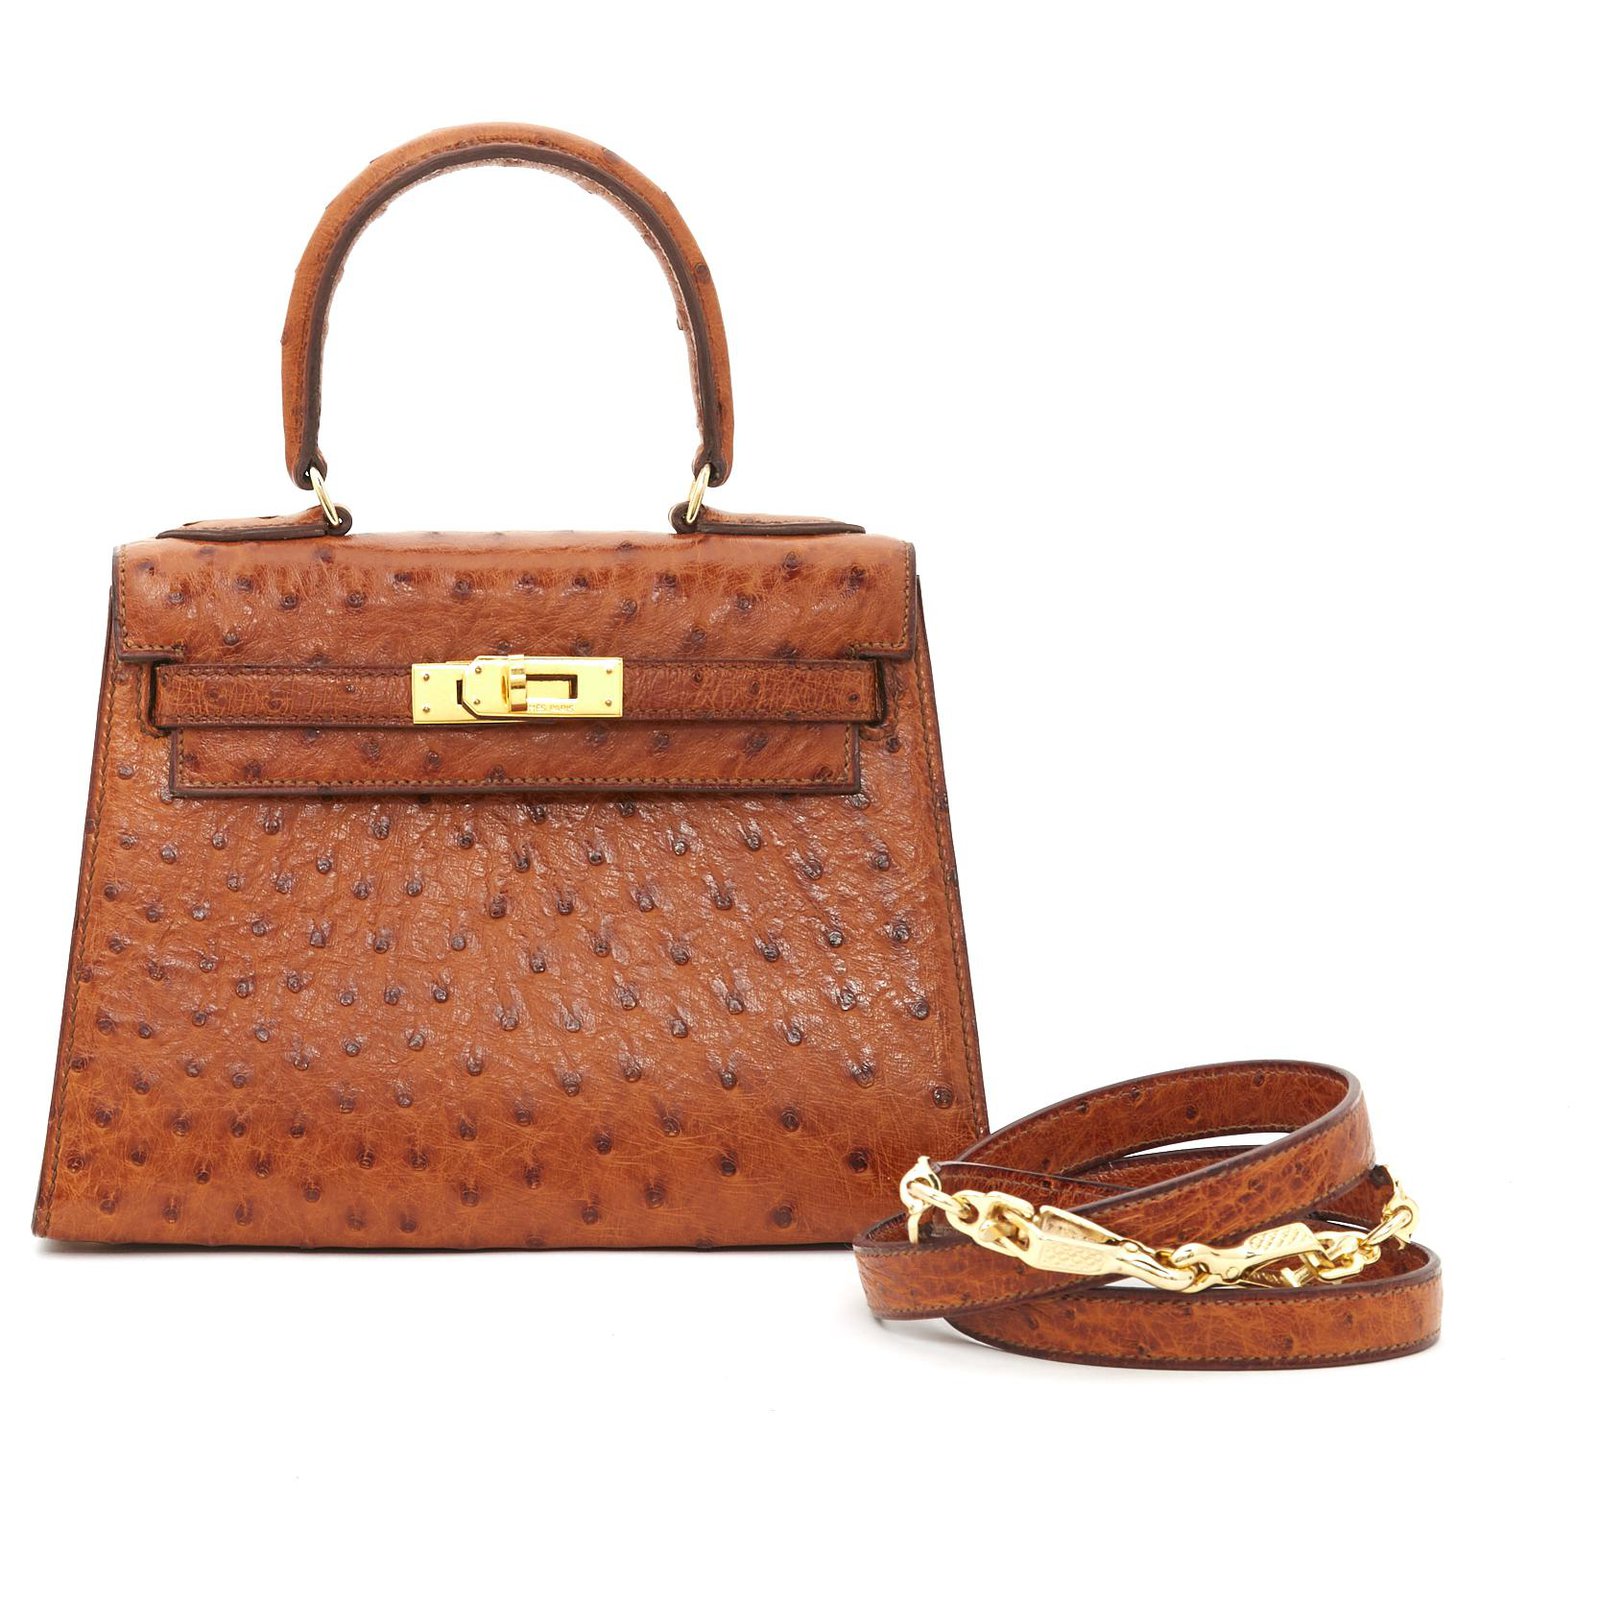 Ostrich Kelly 25 - 5 For Sale on 1stDibs  ostrich kelly 25 price, hermes  kelly ostrich price, hermes ostrich kelly 25